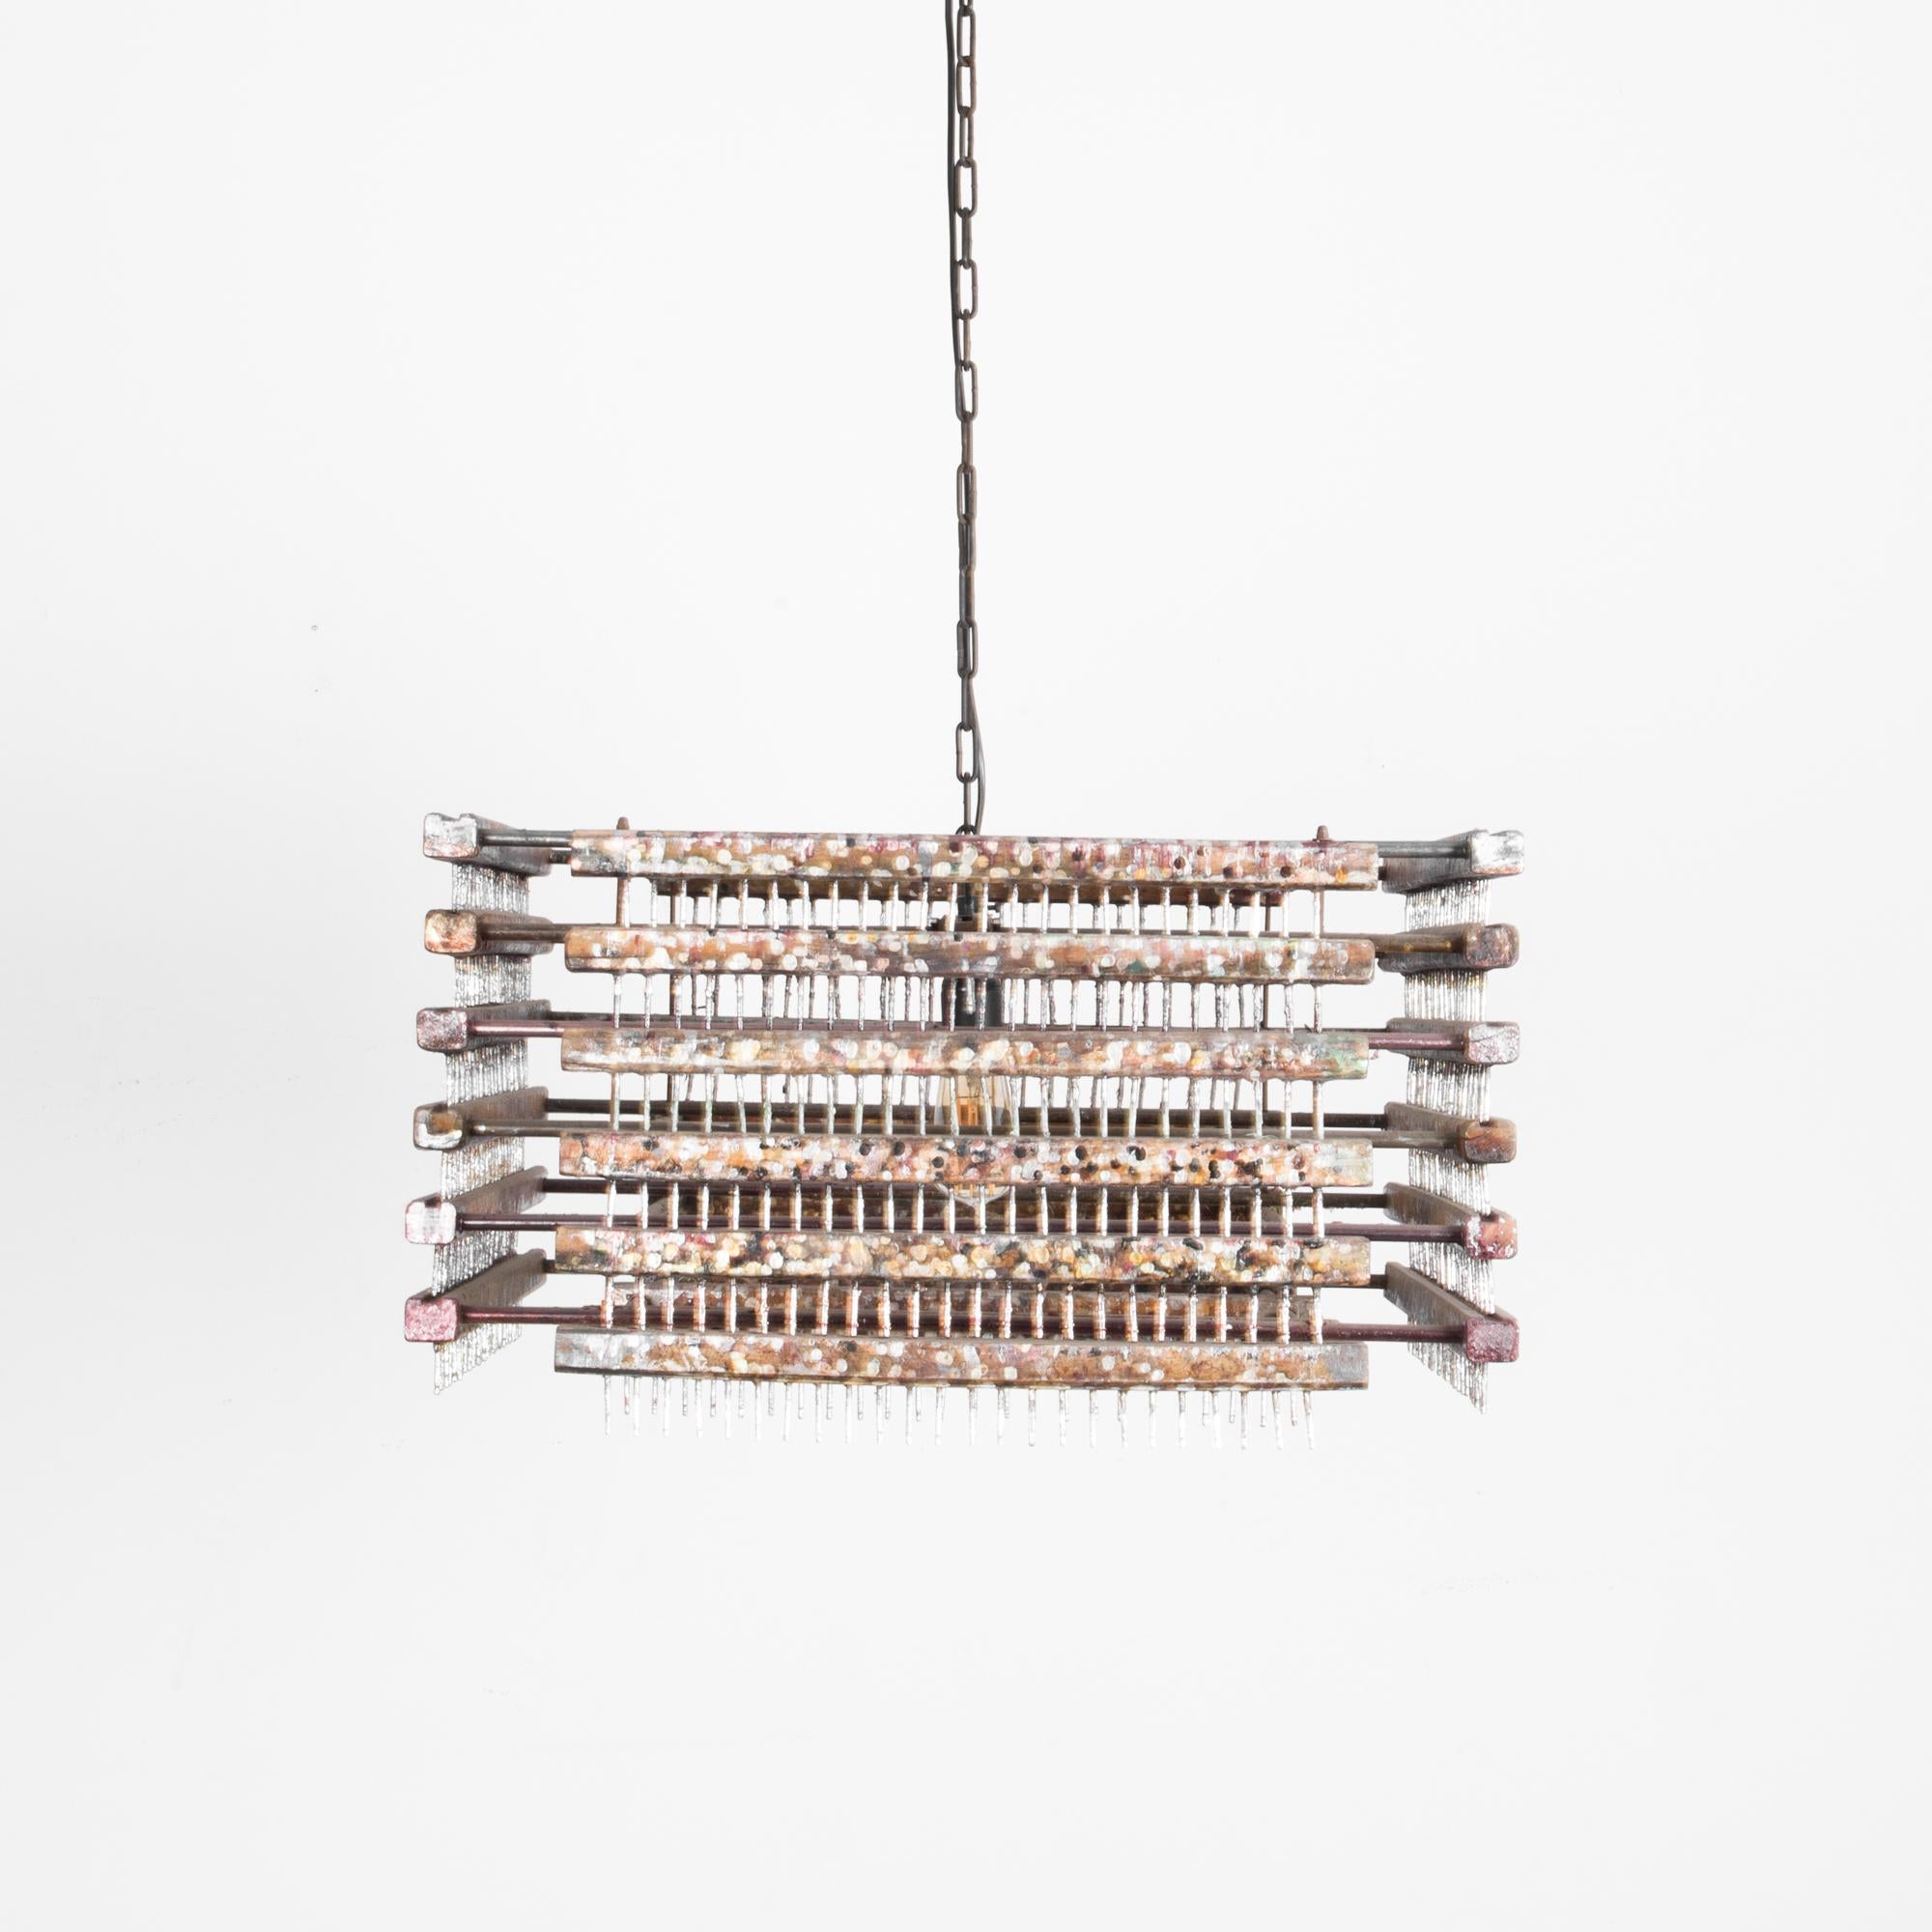 This metal pendant light was made in Czechia in the 1960s.  A ceiling chain sustains a square light fixture made of a grid of metal bars for a stark, brutalist silhouette. The industrial sensibility of the interlocking metal bars is softened by